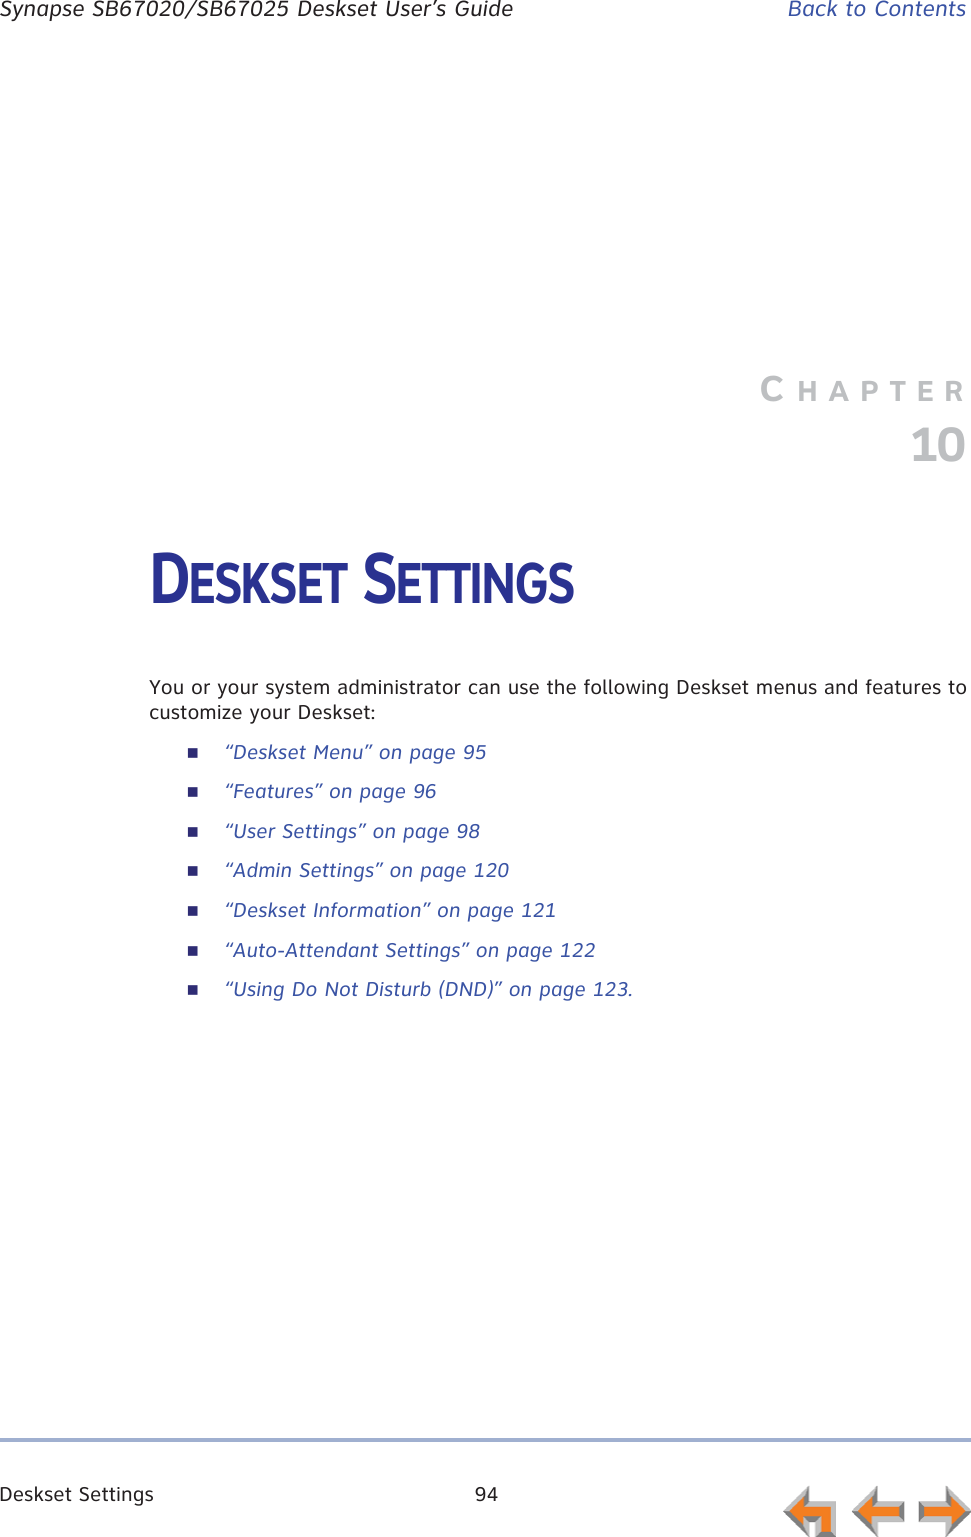 Deskset Settings 94      Synapse SB67020/SB67025 Deskset User’s Guide Back to ContentsCHAPTER10DESKSET SETTINGSYou or your system administrator can use the following Deskset menus and features to customize your Deskset:“Deskset Menu” on page 95“Features” on page 96“User Settings” on page 98“Admin Settings” on page 120“Deskset Information” on page 121“Auto-Attendant Settings” on page 122“Using Do Not Disturb (DND)” on page 123.